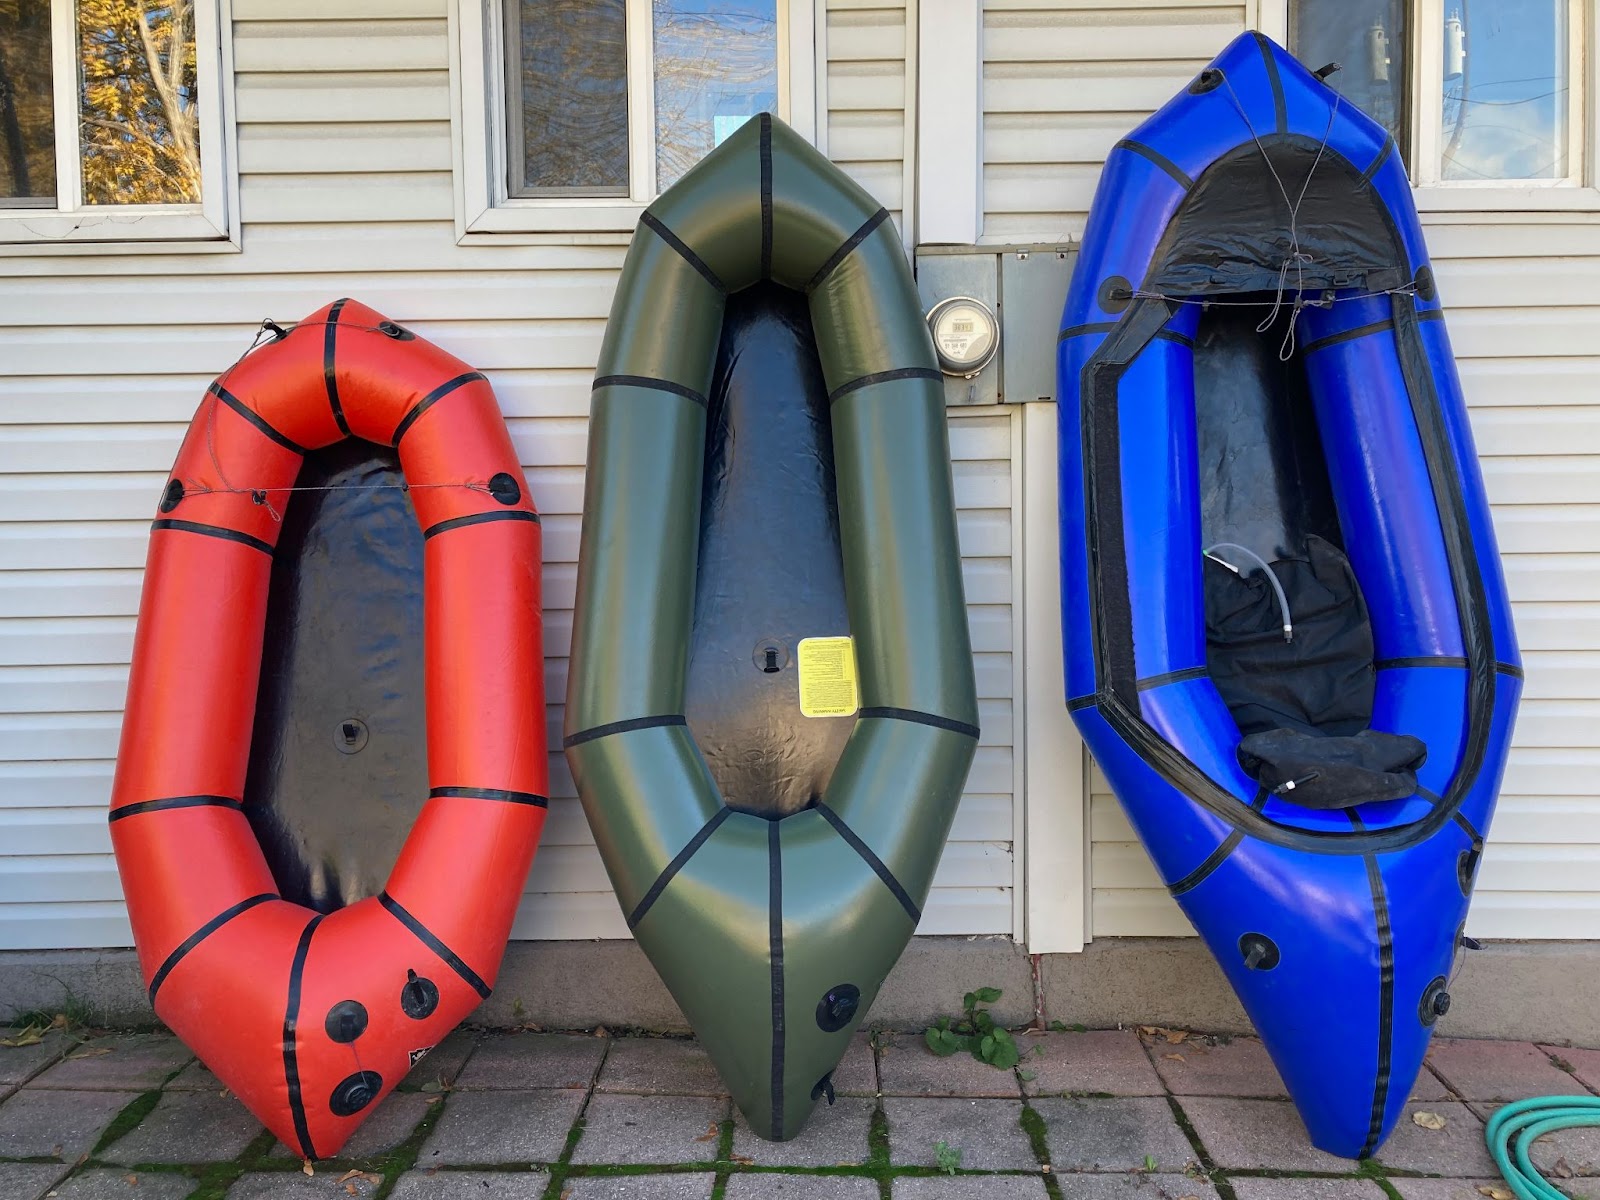 Three packrafts arranged outside on a porch. From left to right they increase in size.